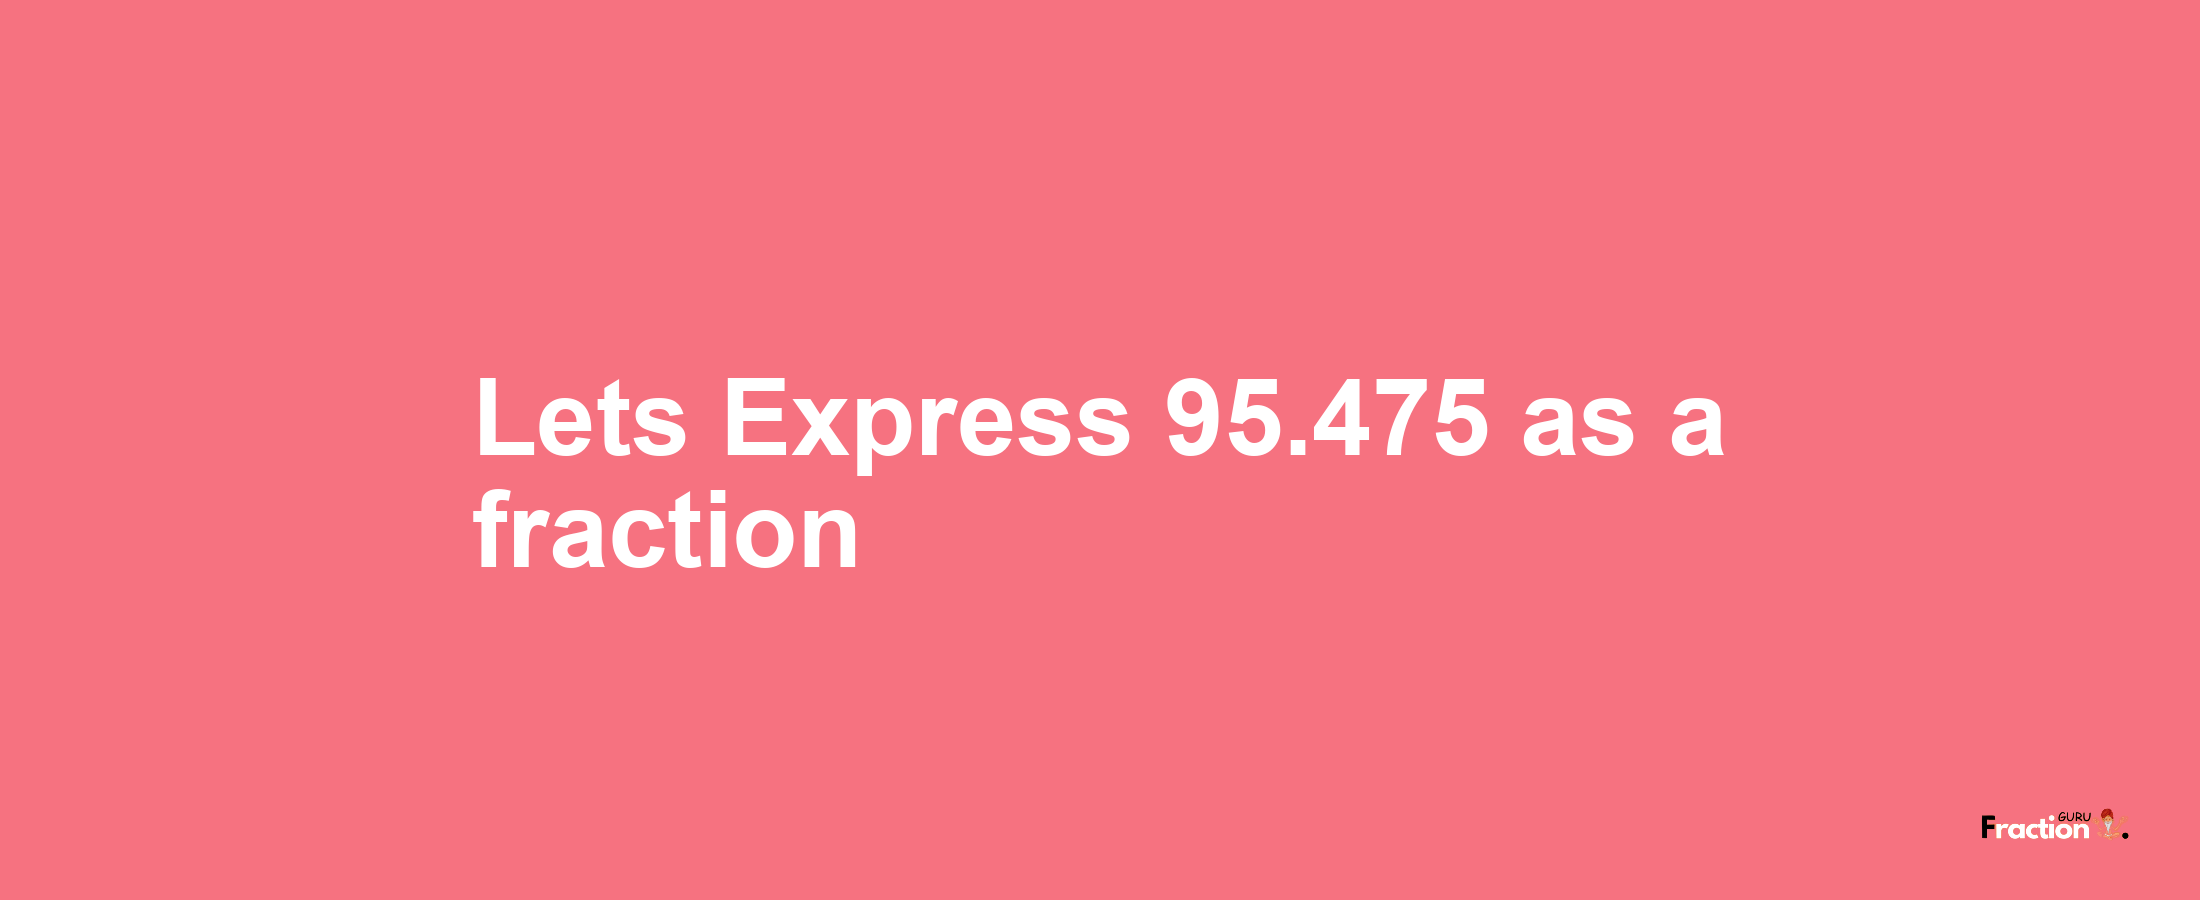 Lets Express 95.475 as afraction